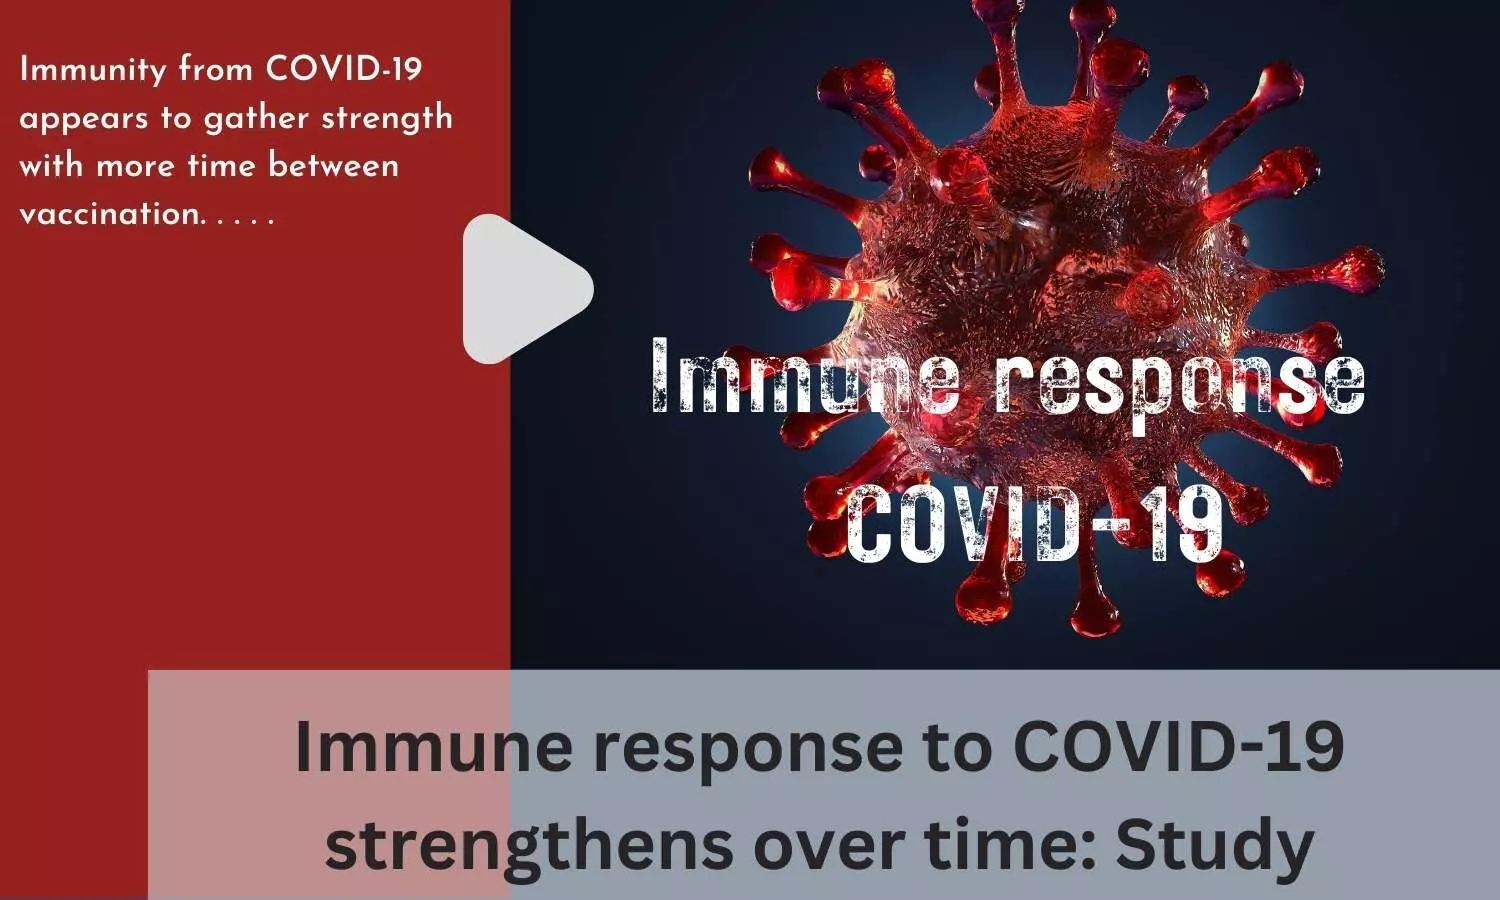 Immune response to COVID-19 strengthens over time: Study